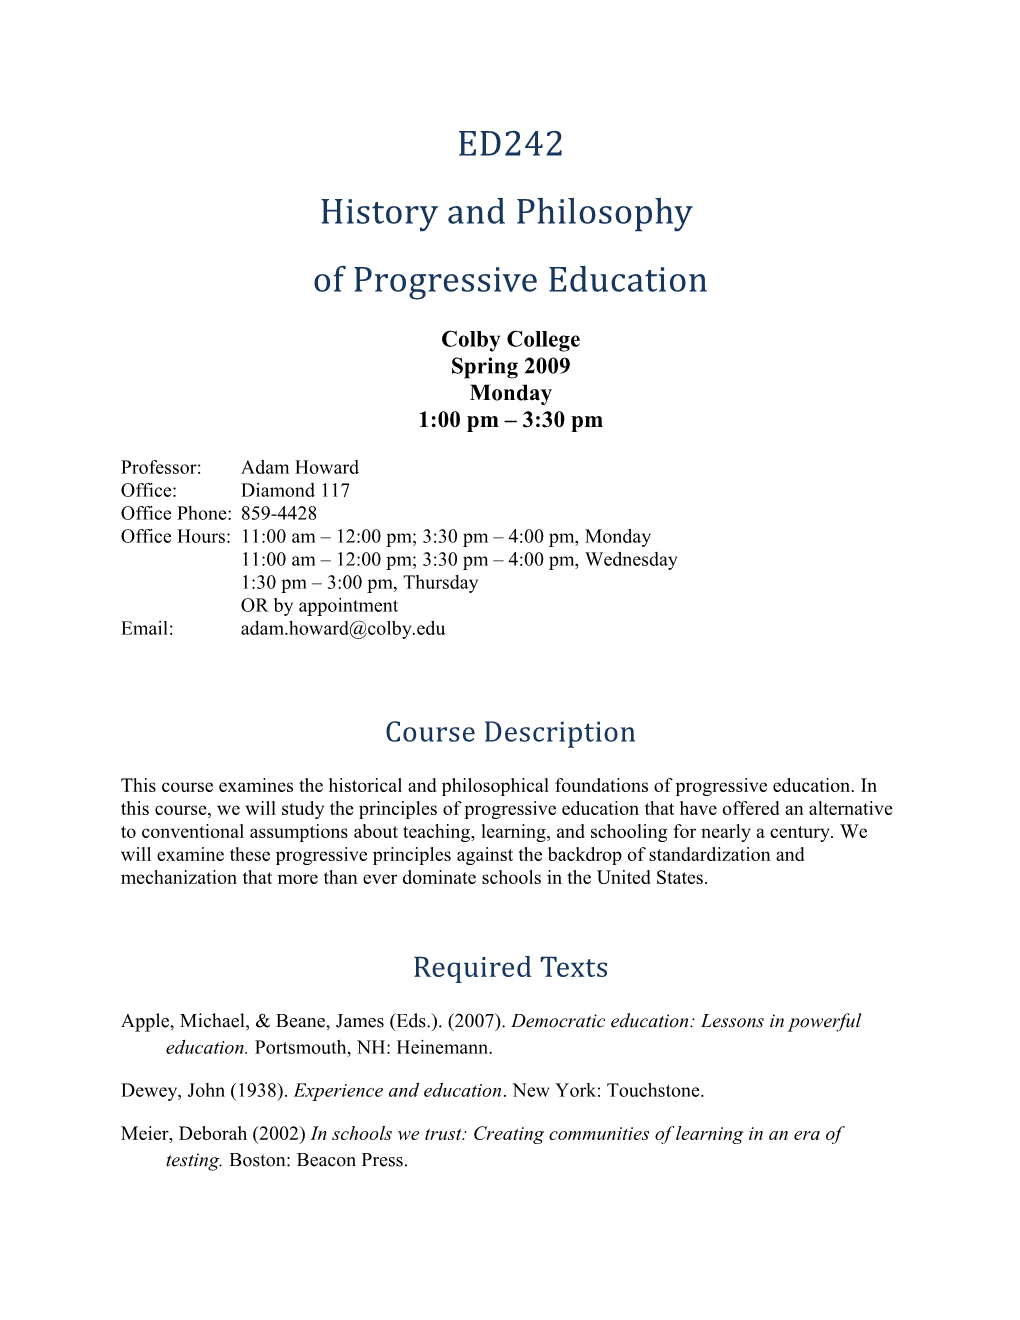 History and Philosophy